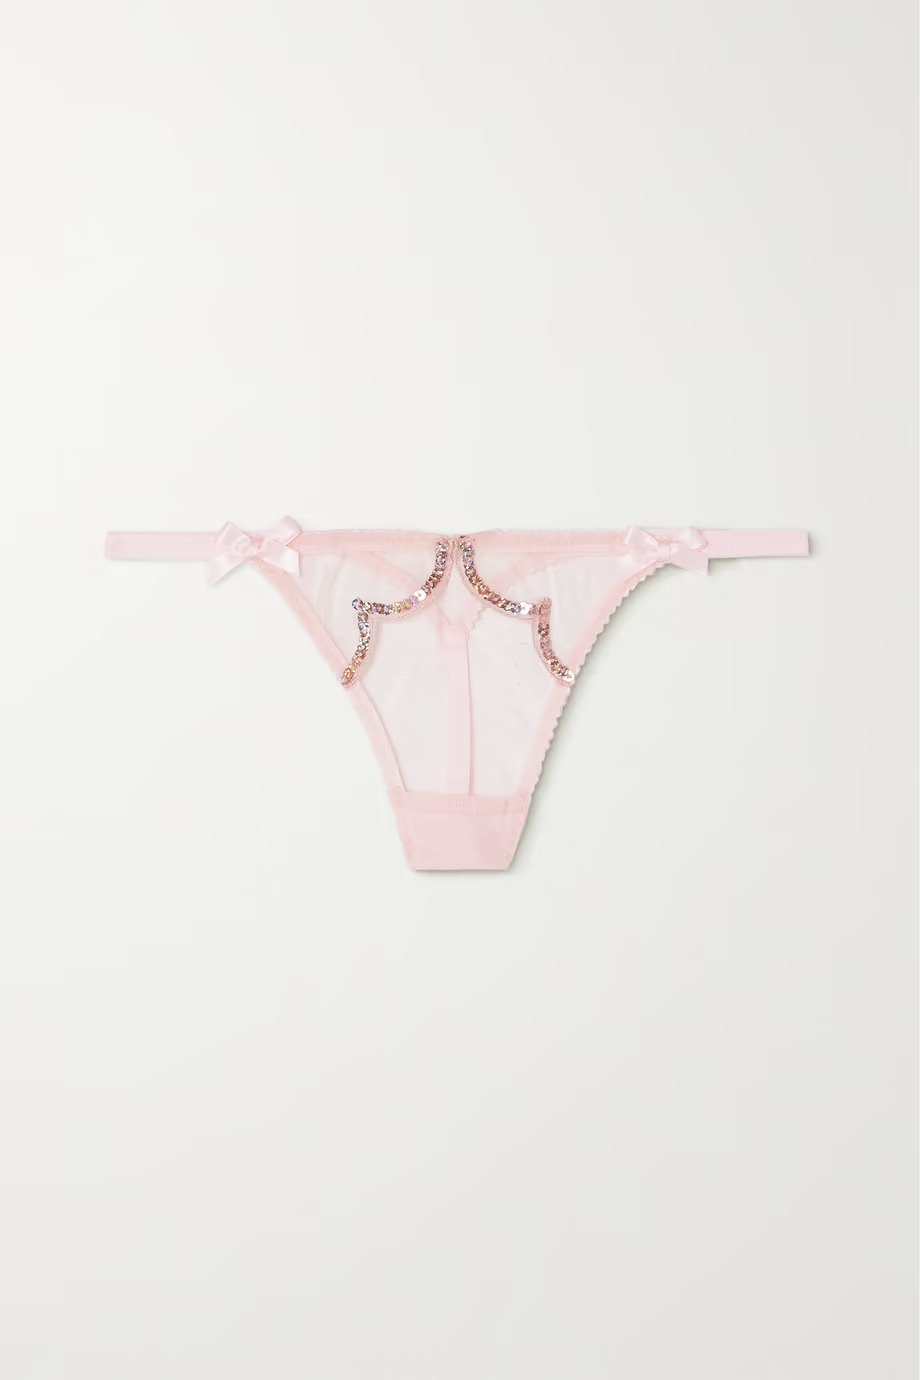 Agent Provocateur + Lorna Party Sequin-Embellished Thong